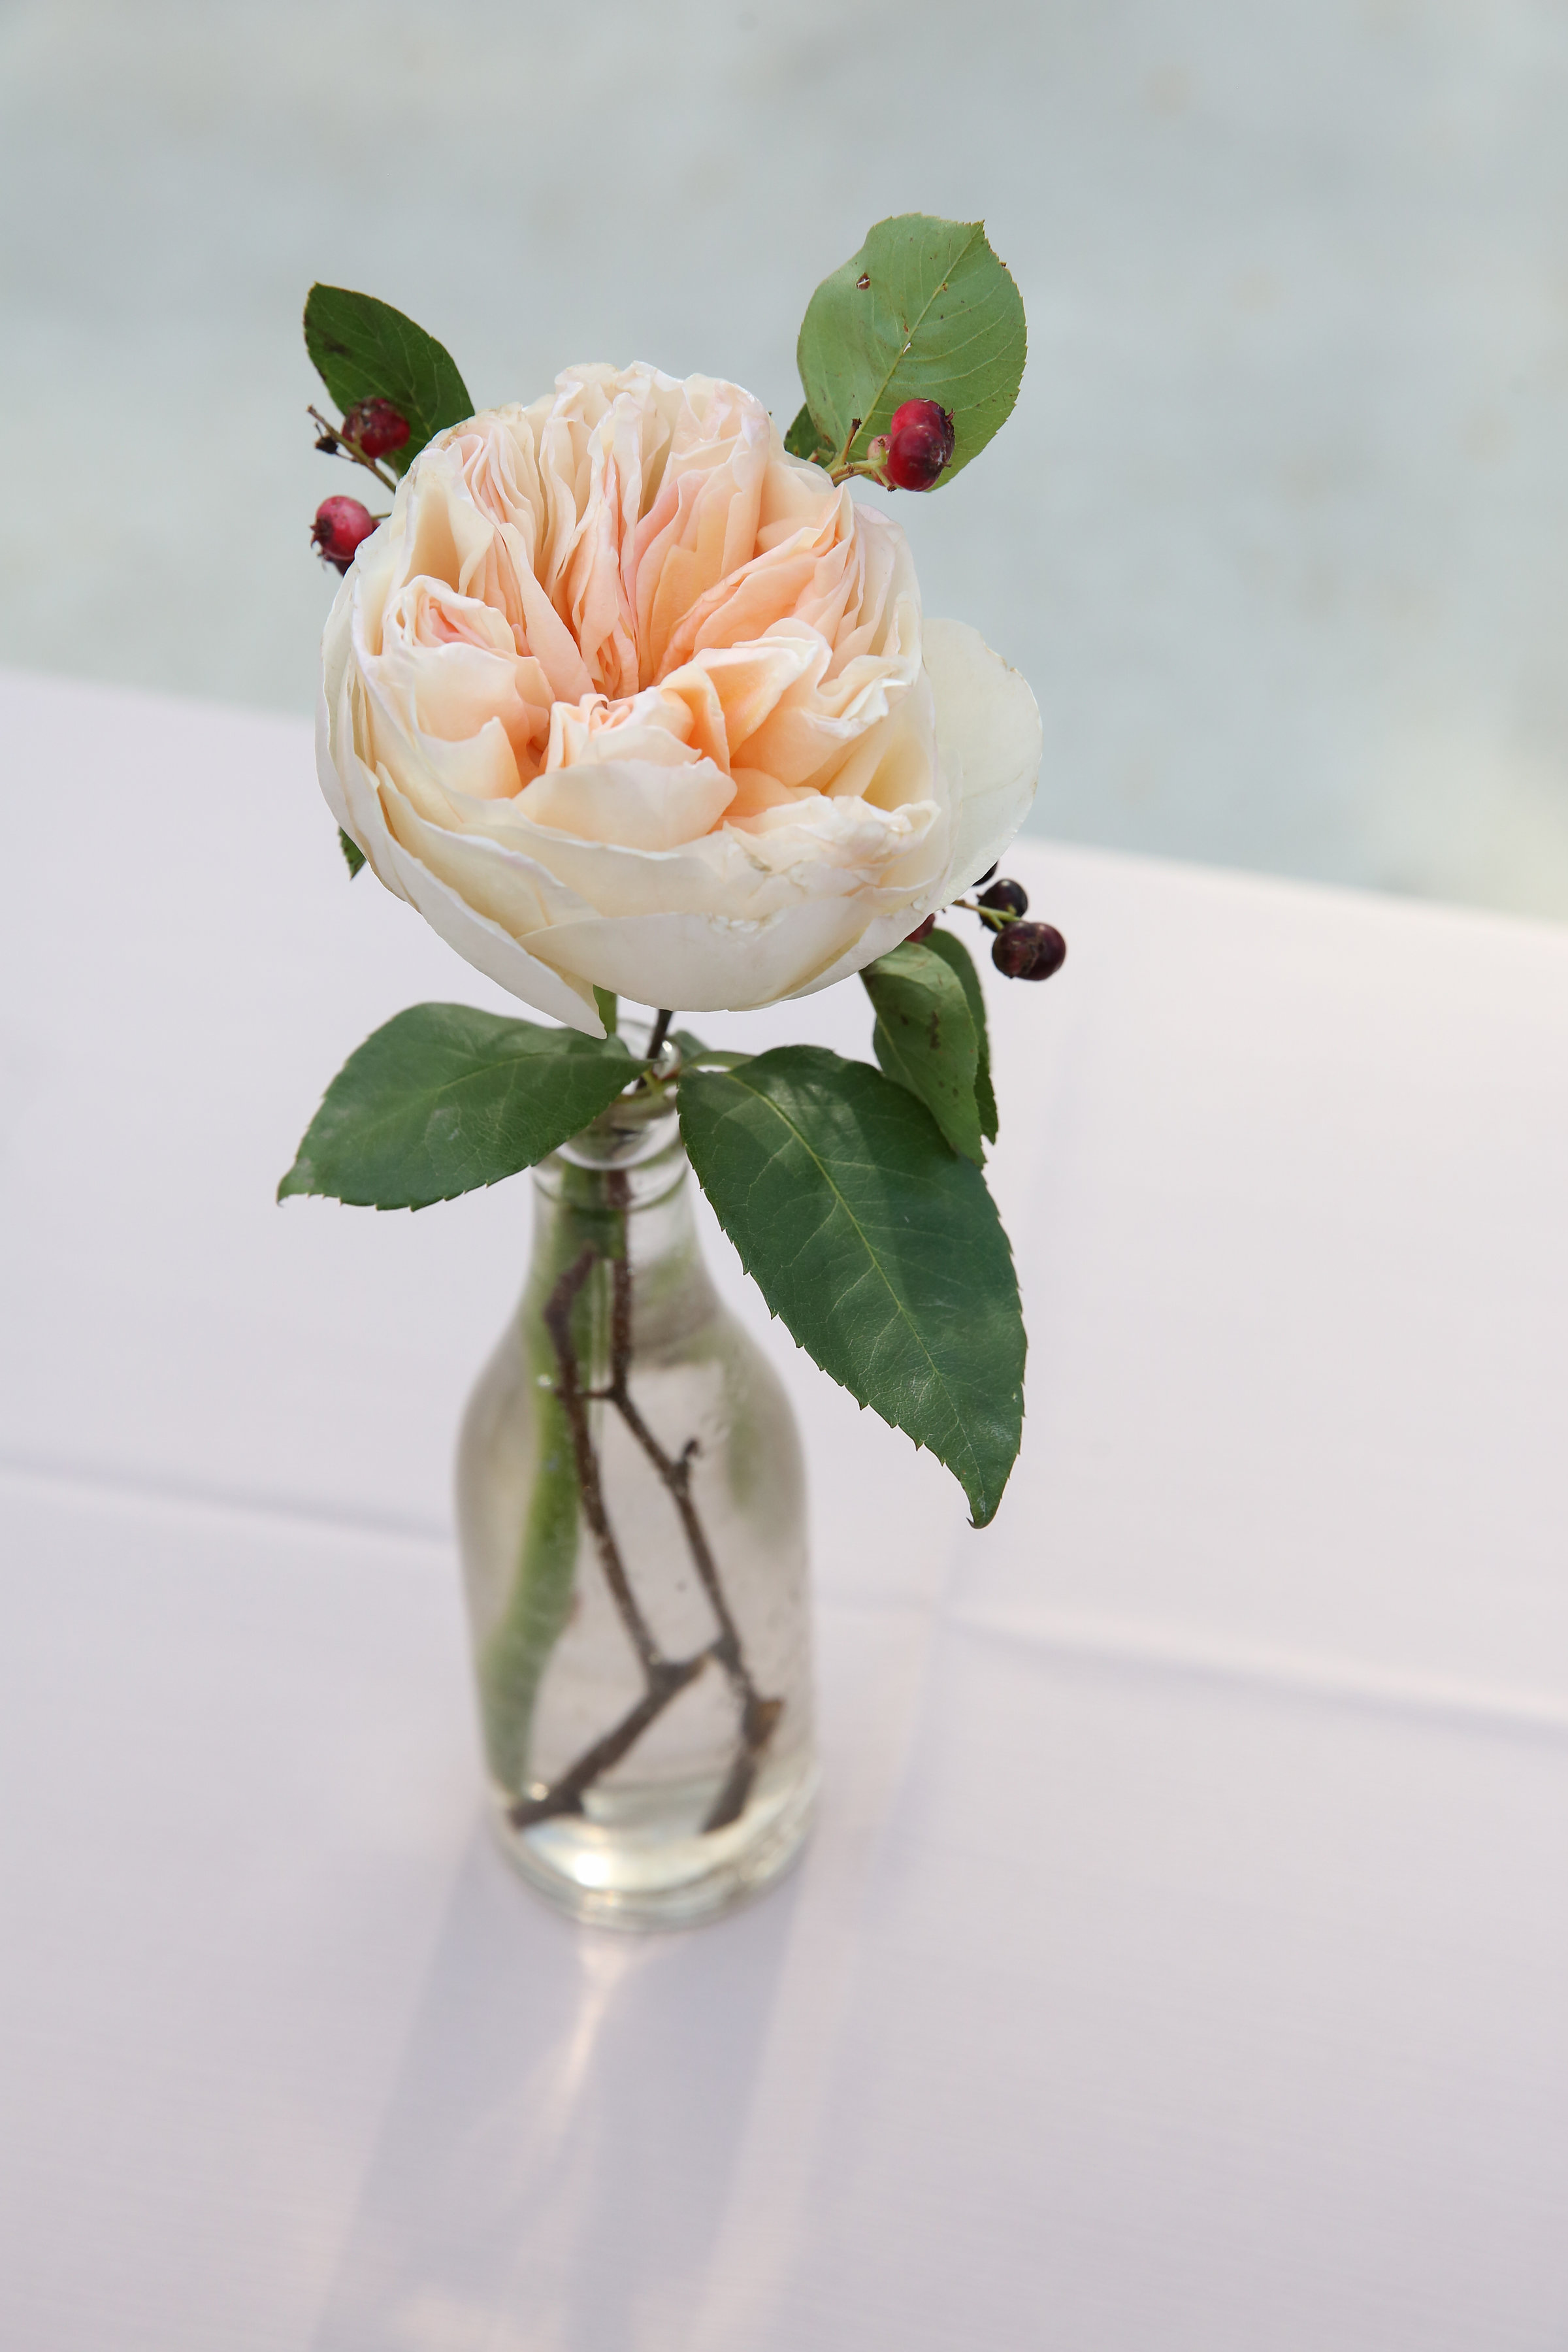 Single garden rose in pale salmon with berries for early summer wedding reception.